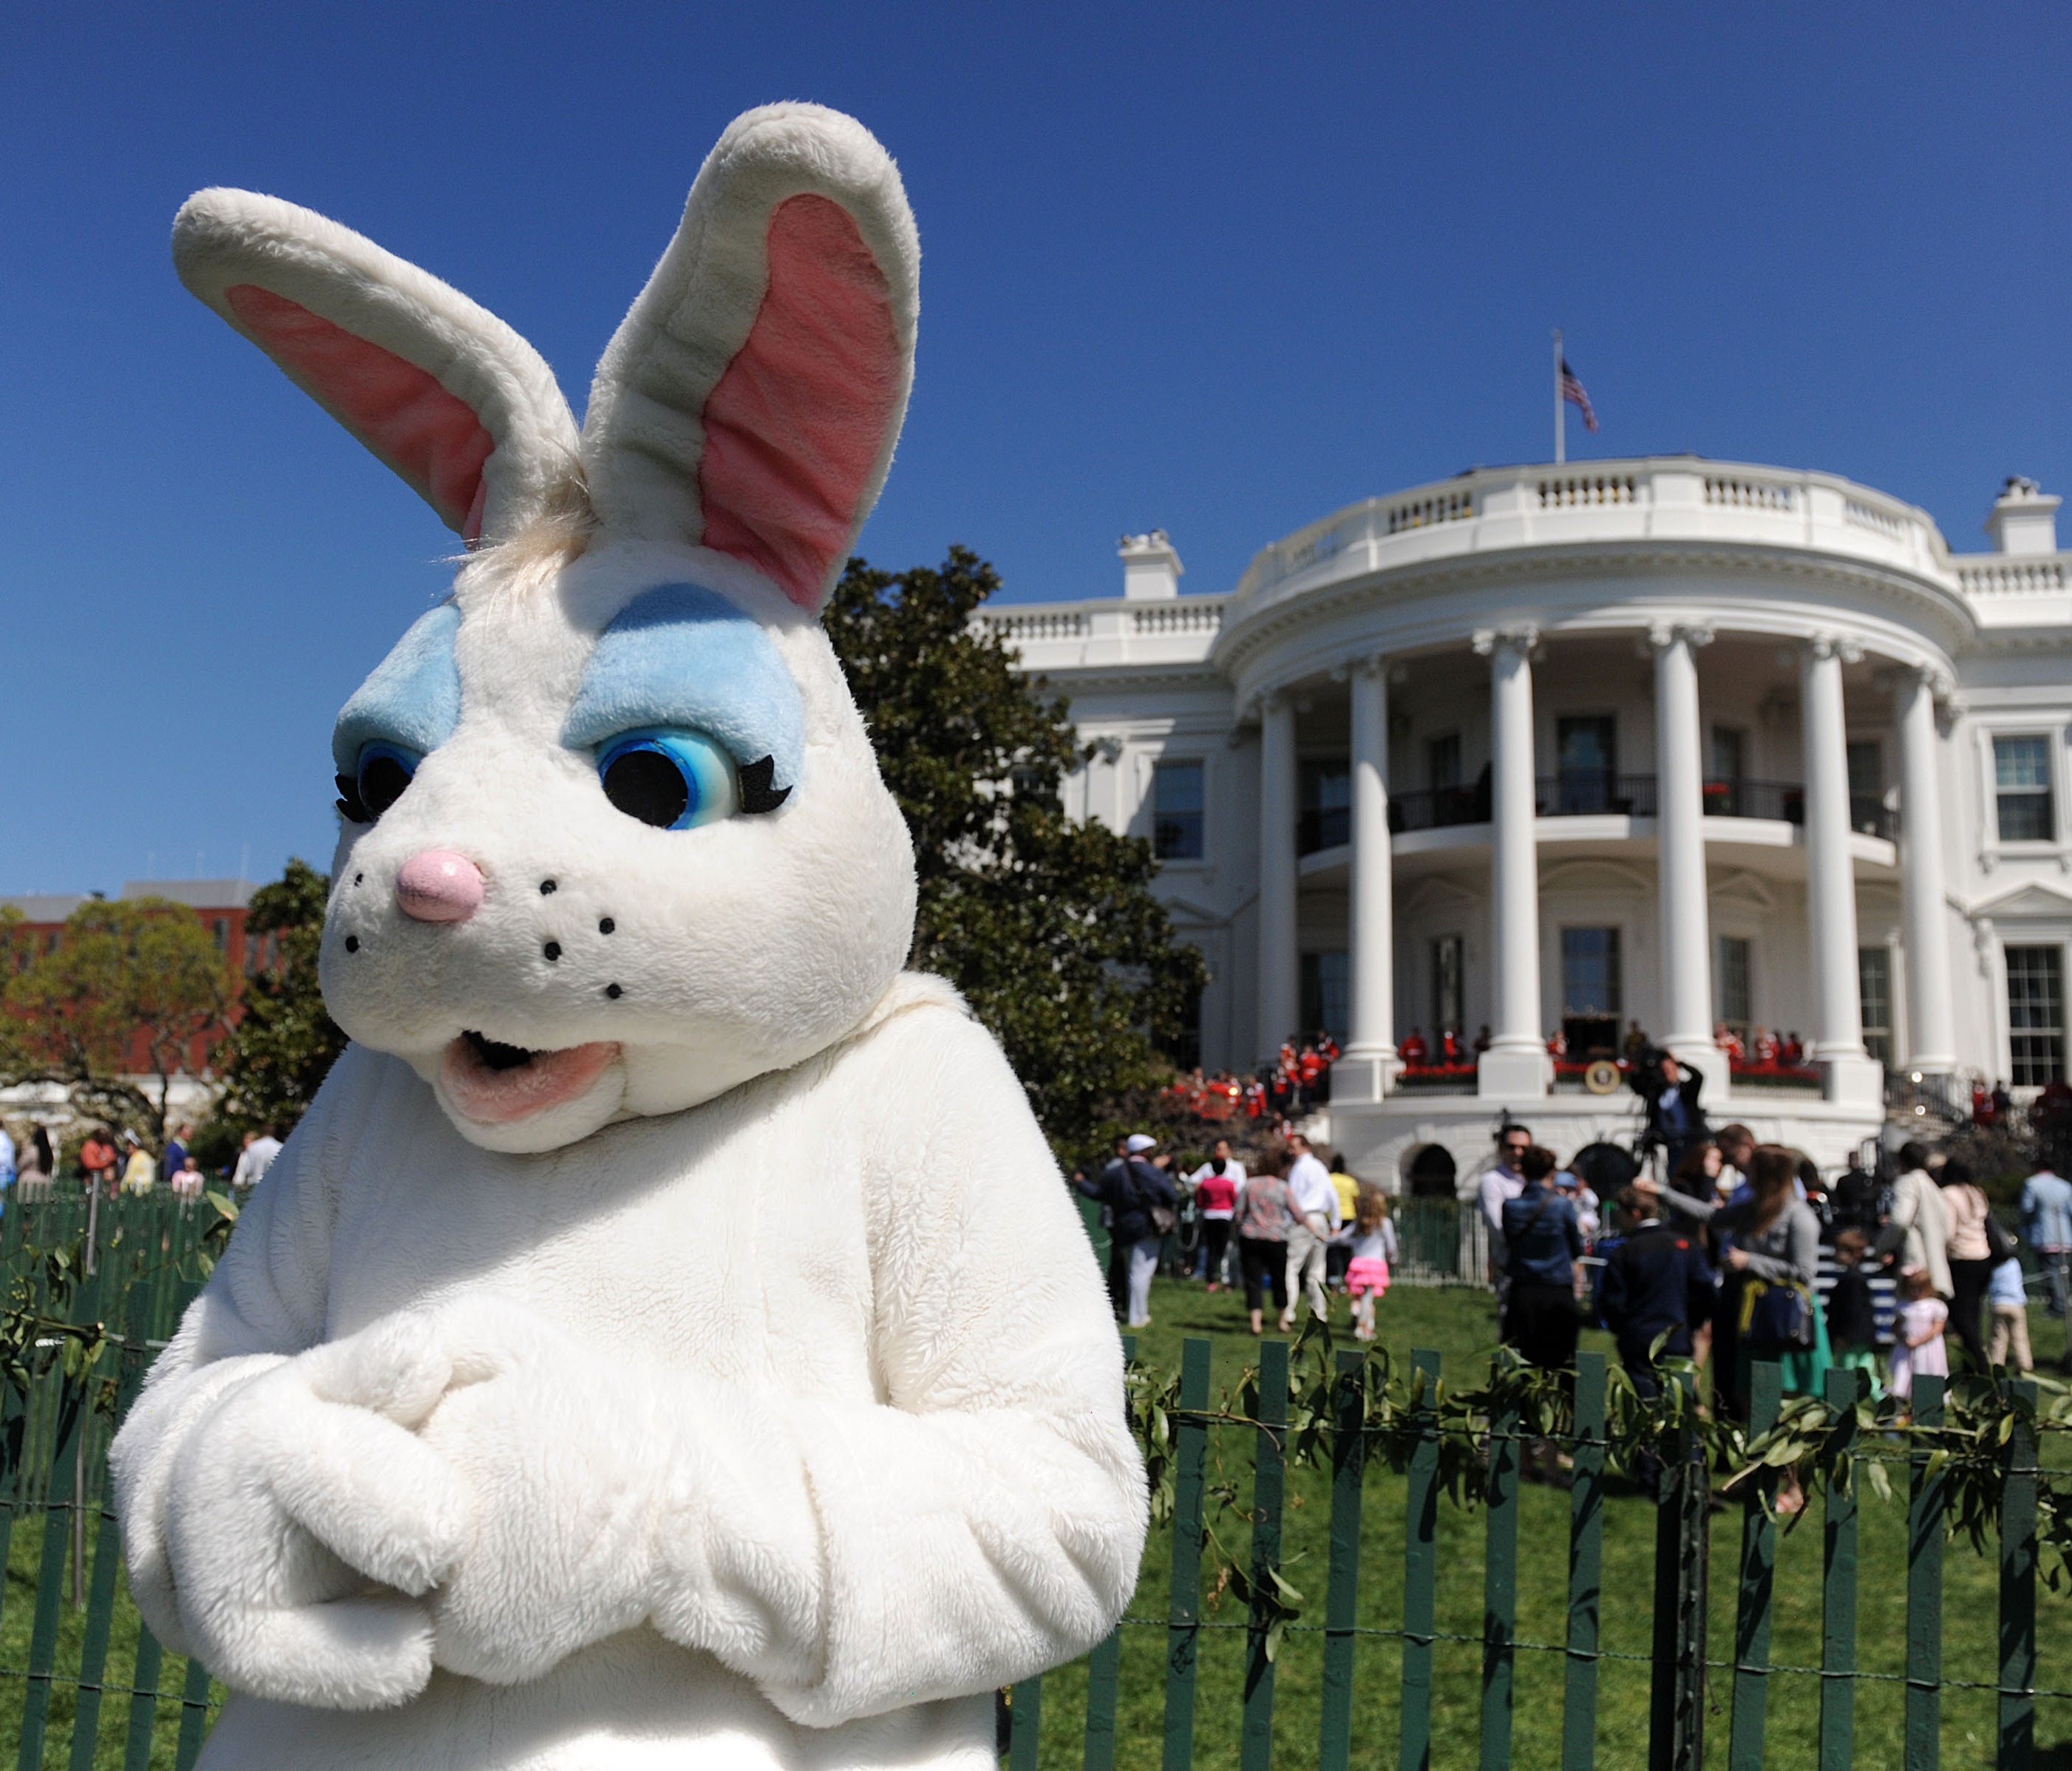 A person dressed as a Easter bunny watches children participate in the annual White House Easter Egg Roll on the South Lawn April 21, 2014 in Washington, DC.